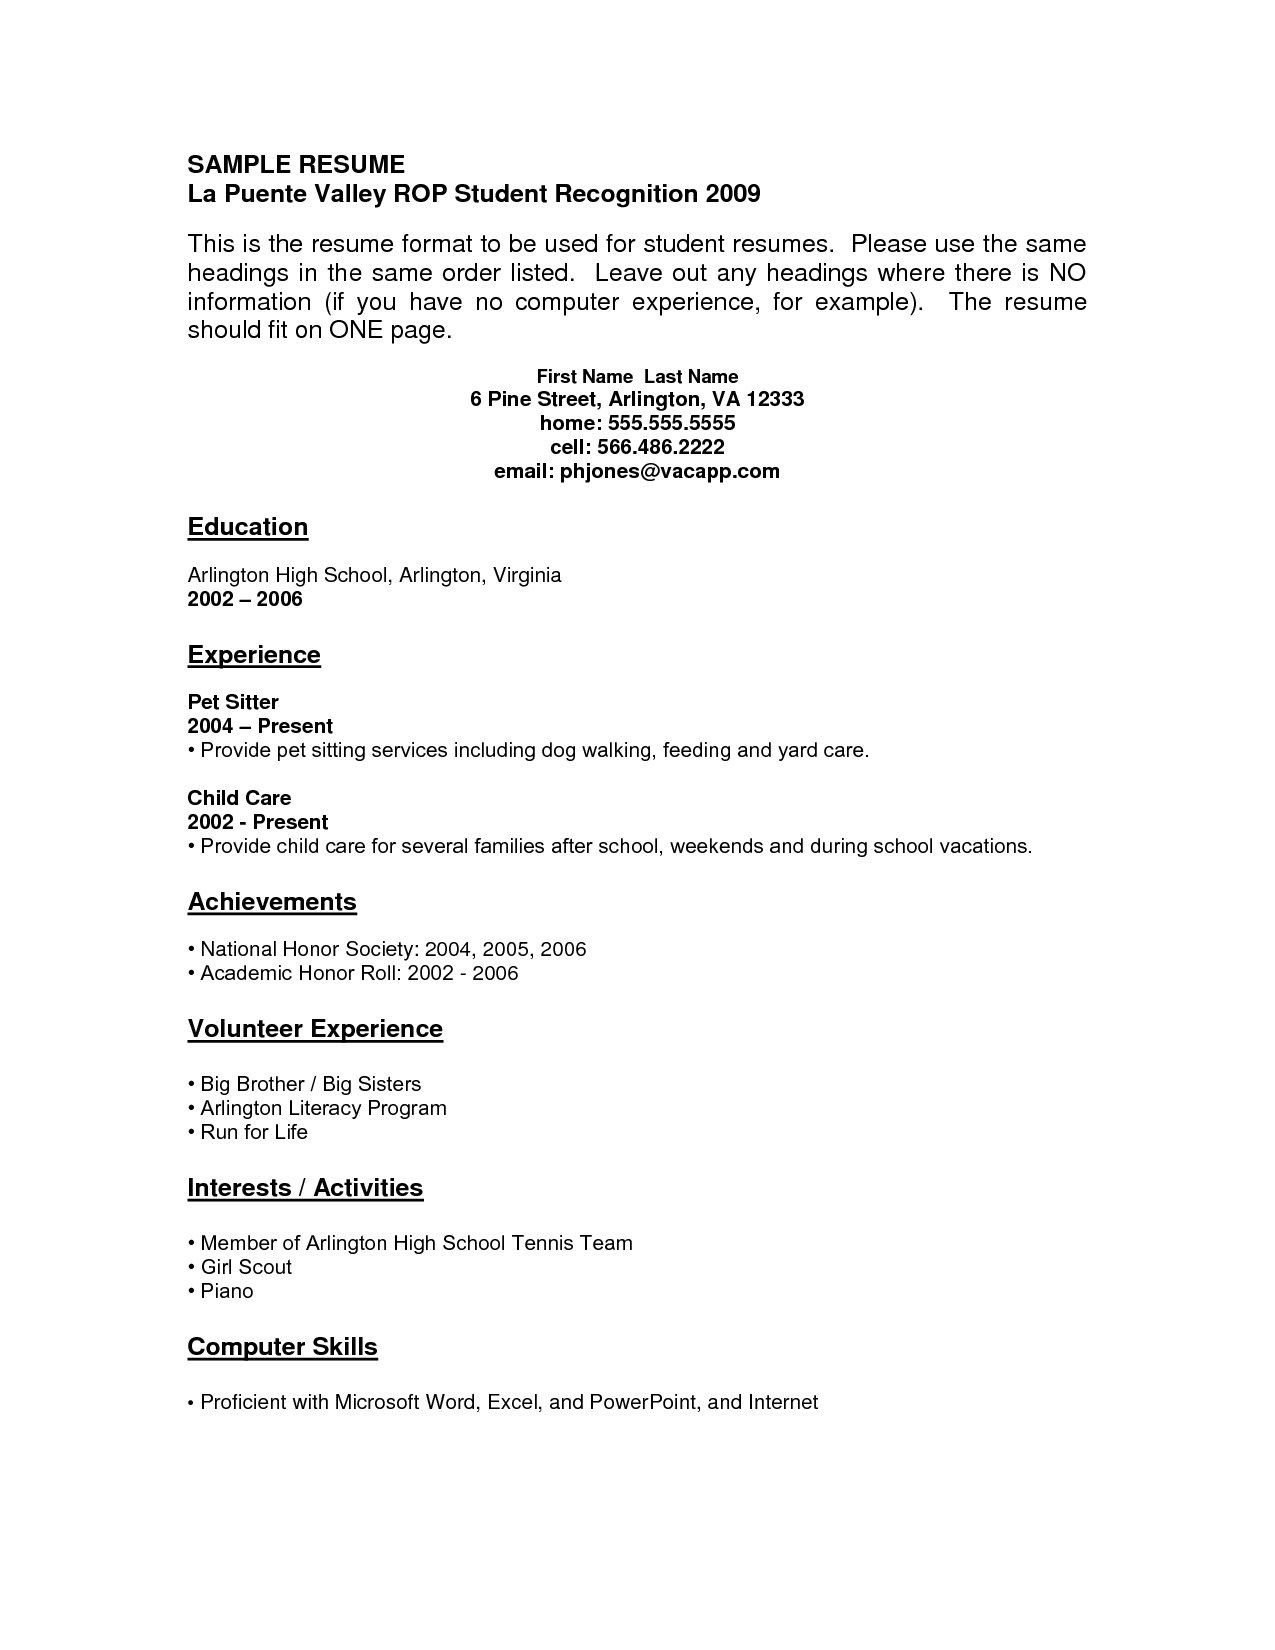 Free Resume Templates for Highschool Students with No Experience Resume Examples with No Job Experience – Resume Templates Job …